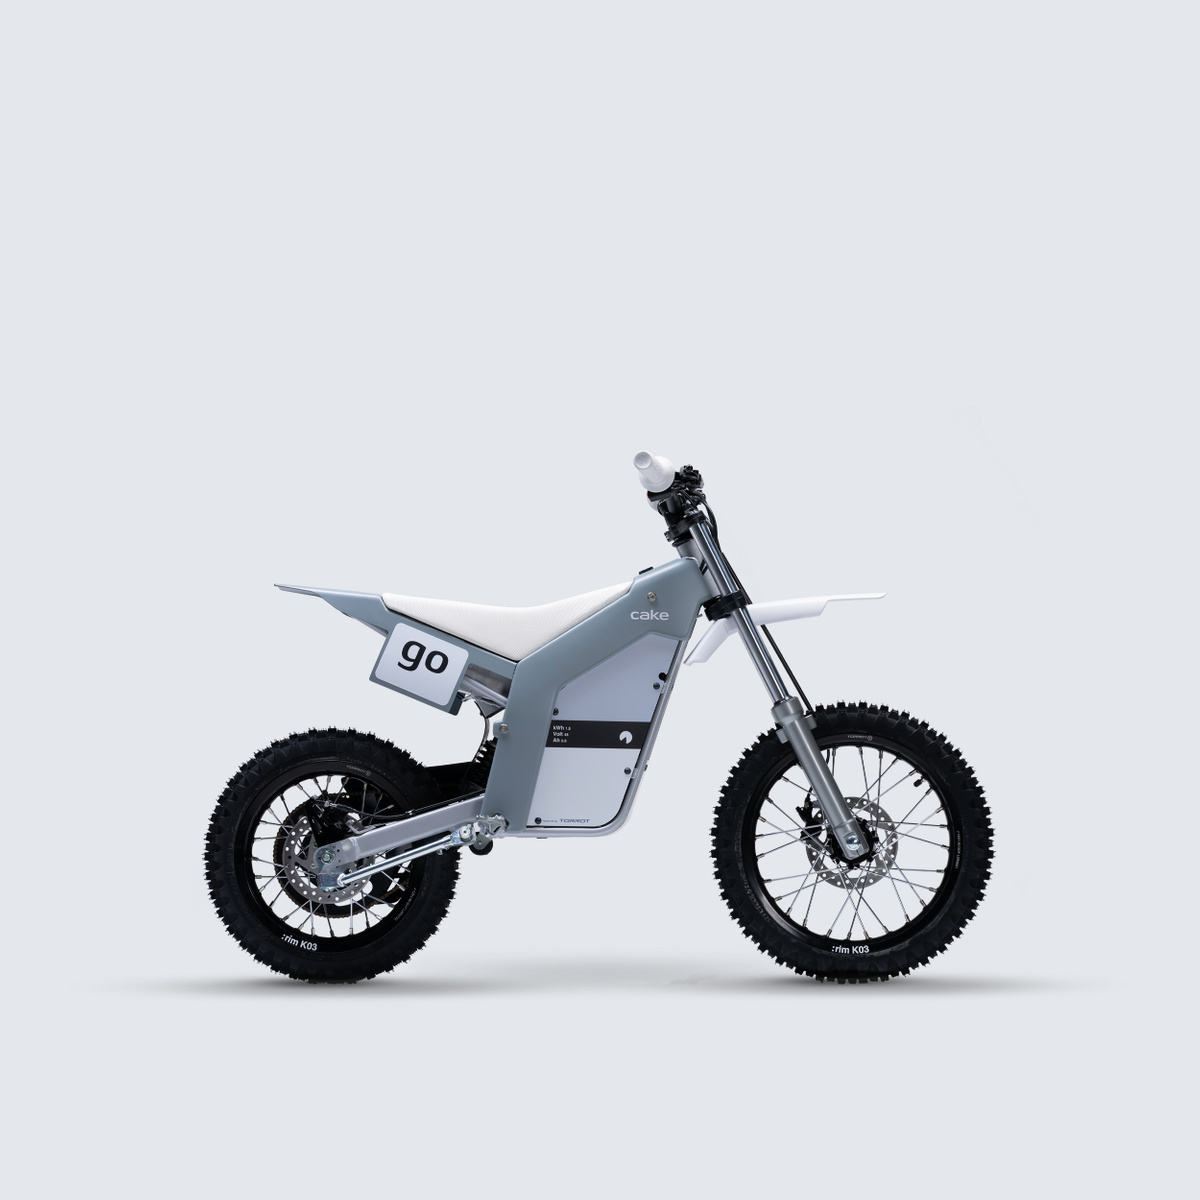 A view of the CAKE Trapp, an entry-level off-roading bike for kids aged 6 years and up. Media sourced from CAKE.